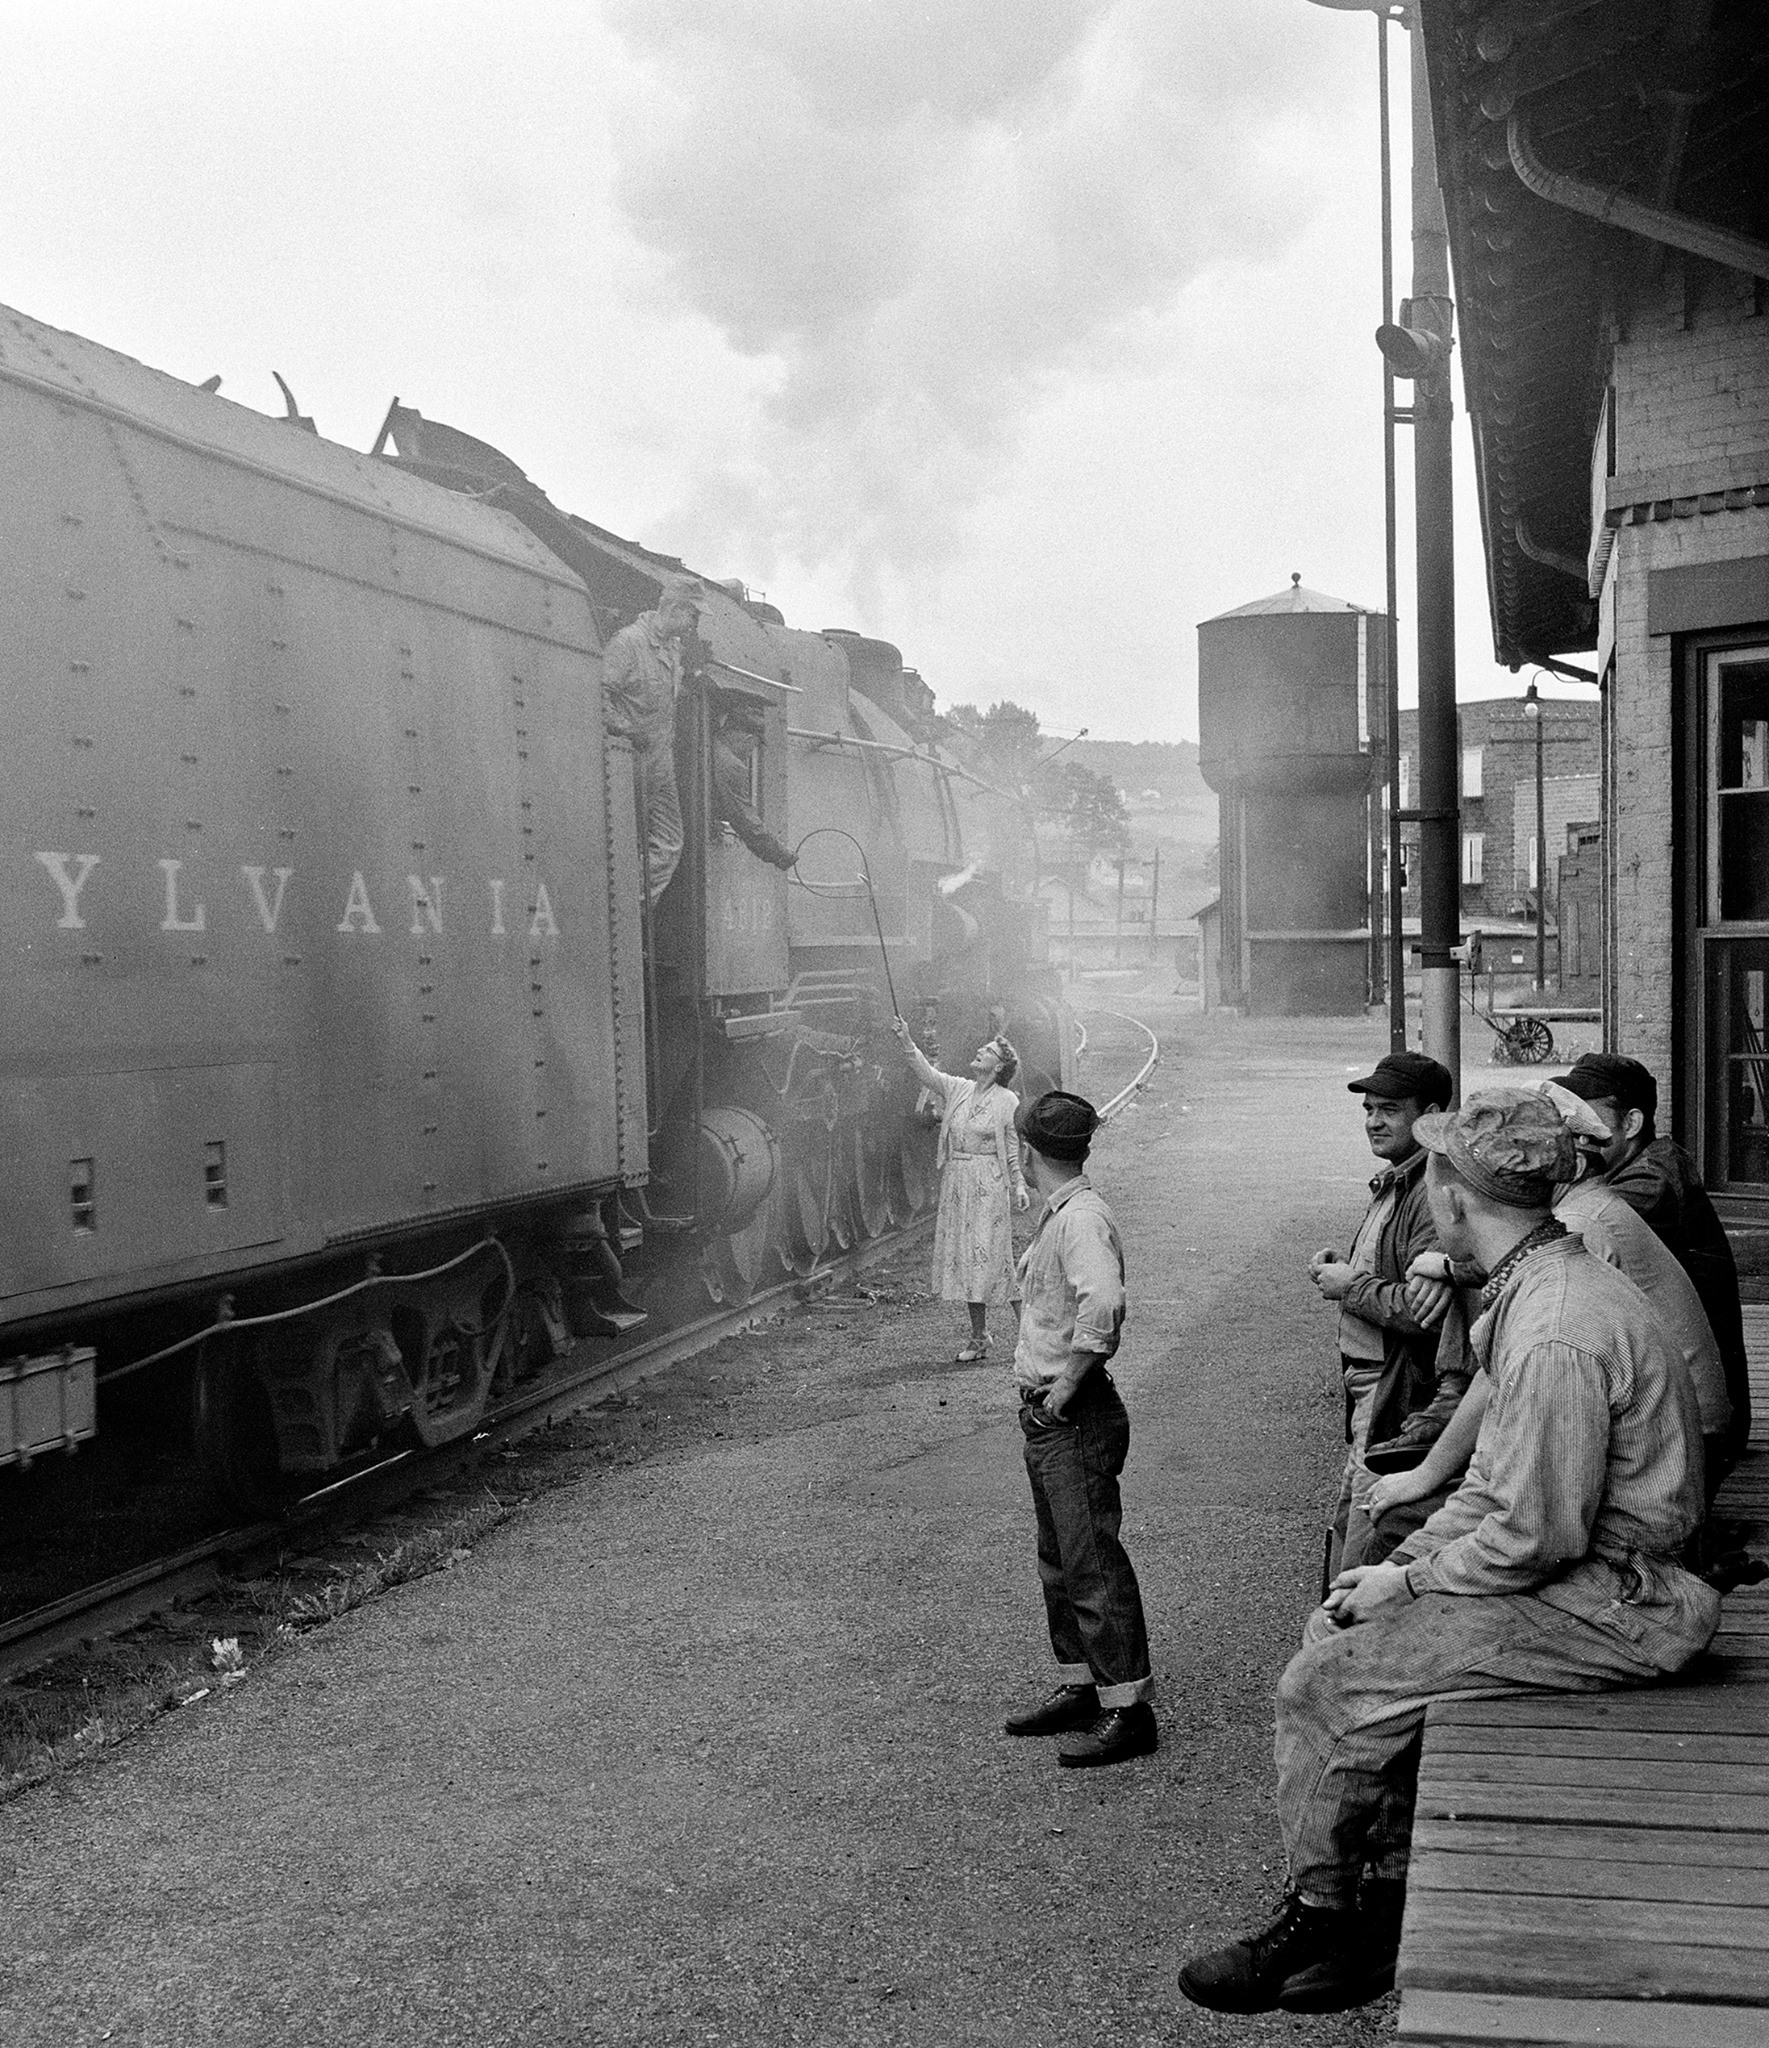 In this image by Jim Shaughnessy, Louise Overhiser, the block operator at the Pennsylvania’s Watkins Glen, New York, station hands orders up to the engineer of a big 386,000-pound I-1 class 2–10–0 #4512, as it thunders past her with a string of empty coal hopper cars. Nearby, the crew of an Elmira Branch local freight wait for the passing train to clear so they can come out of a side track and continue north. Image shot by Shaughnessy, circa 1955.